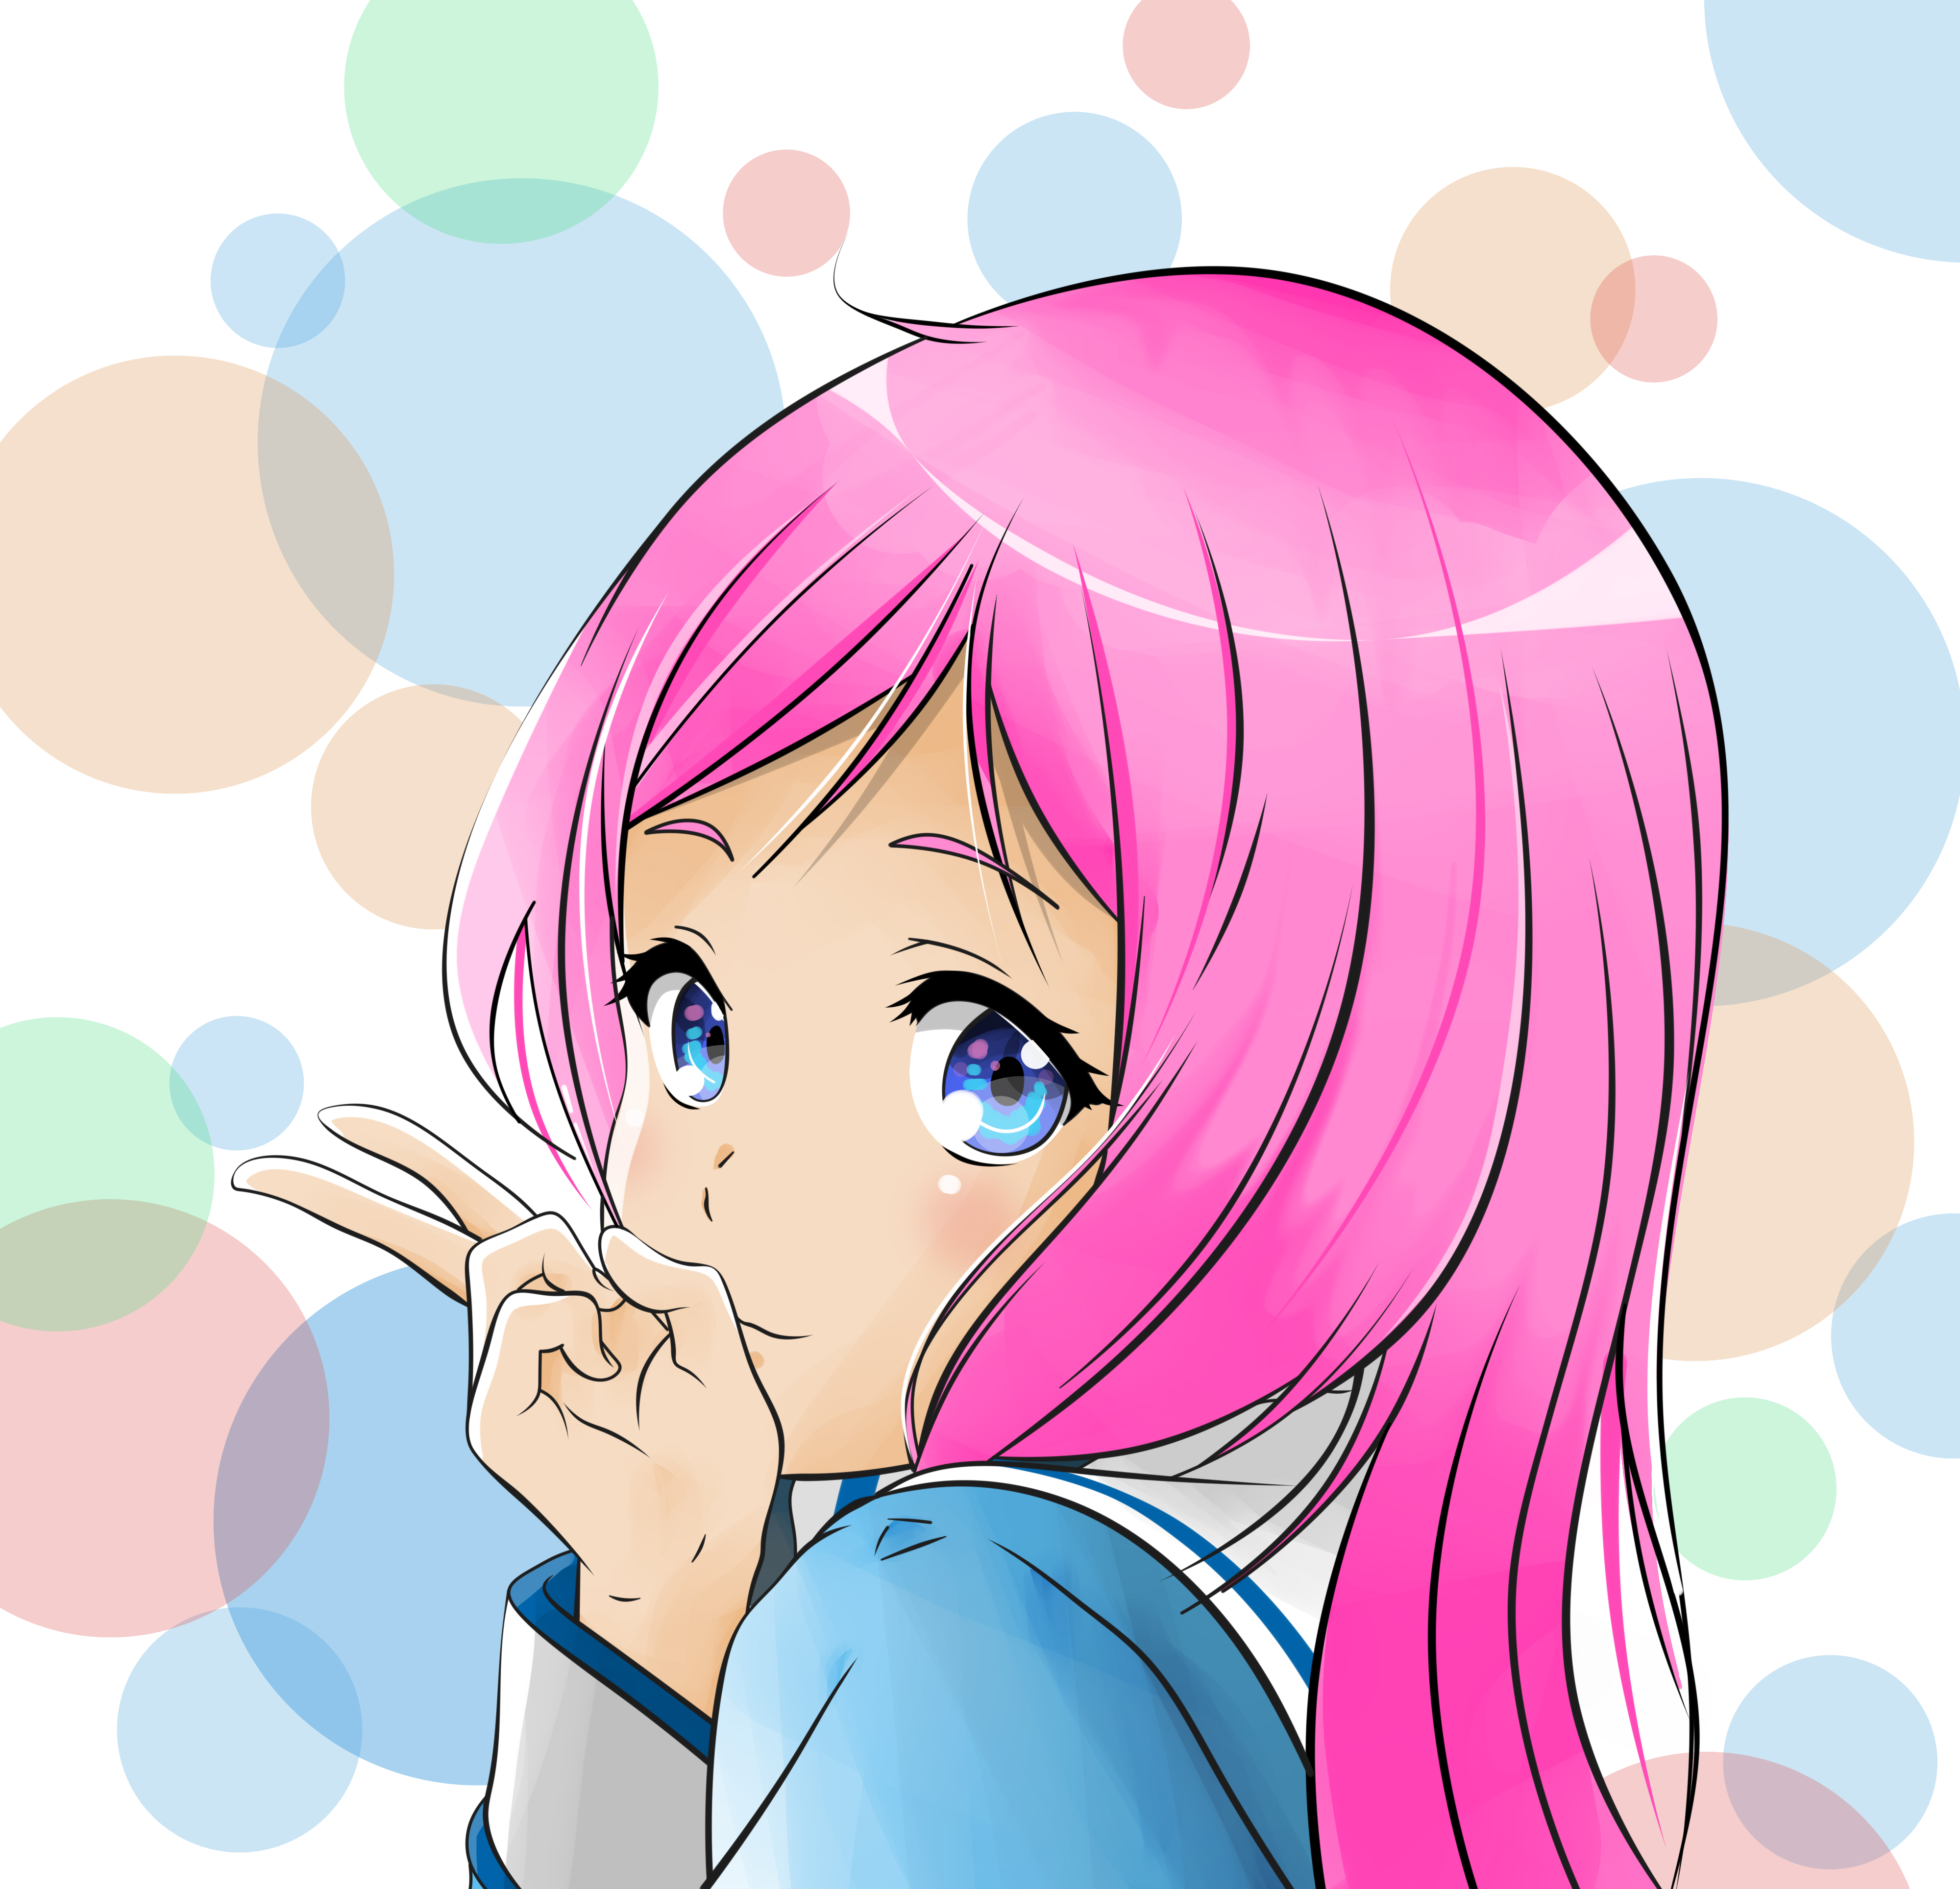 Little cute girl anime style Royalty Free Vector Image